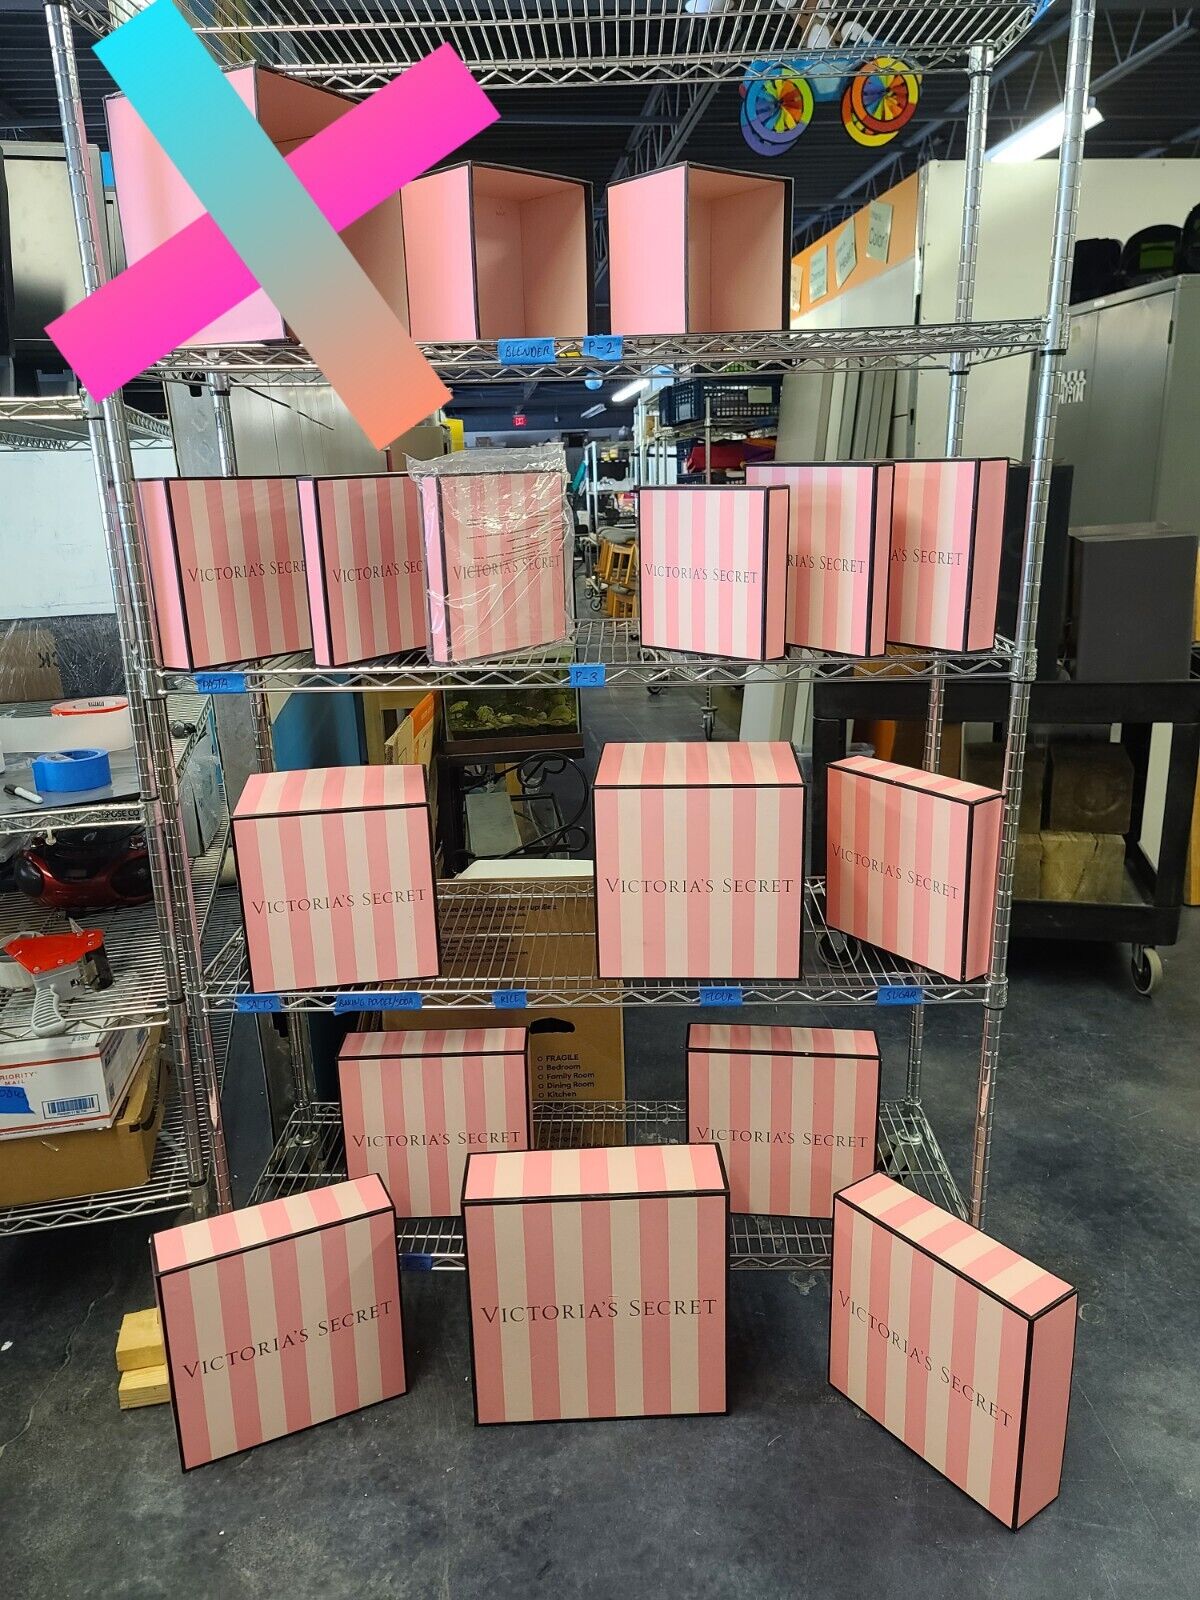 VICTORIA'S SECRET BOXES DISPLAY PROPS BOXES 15 In Total